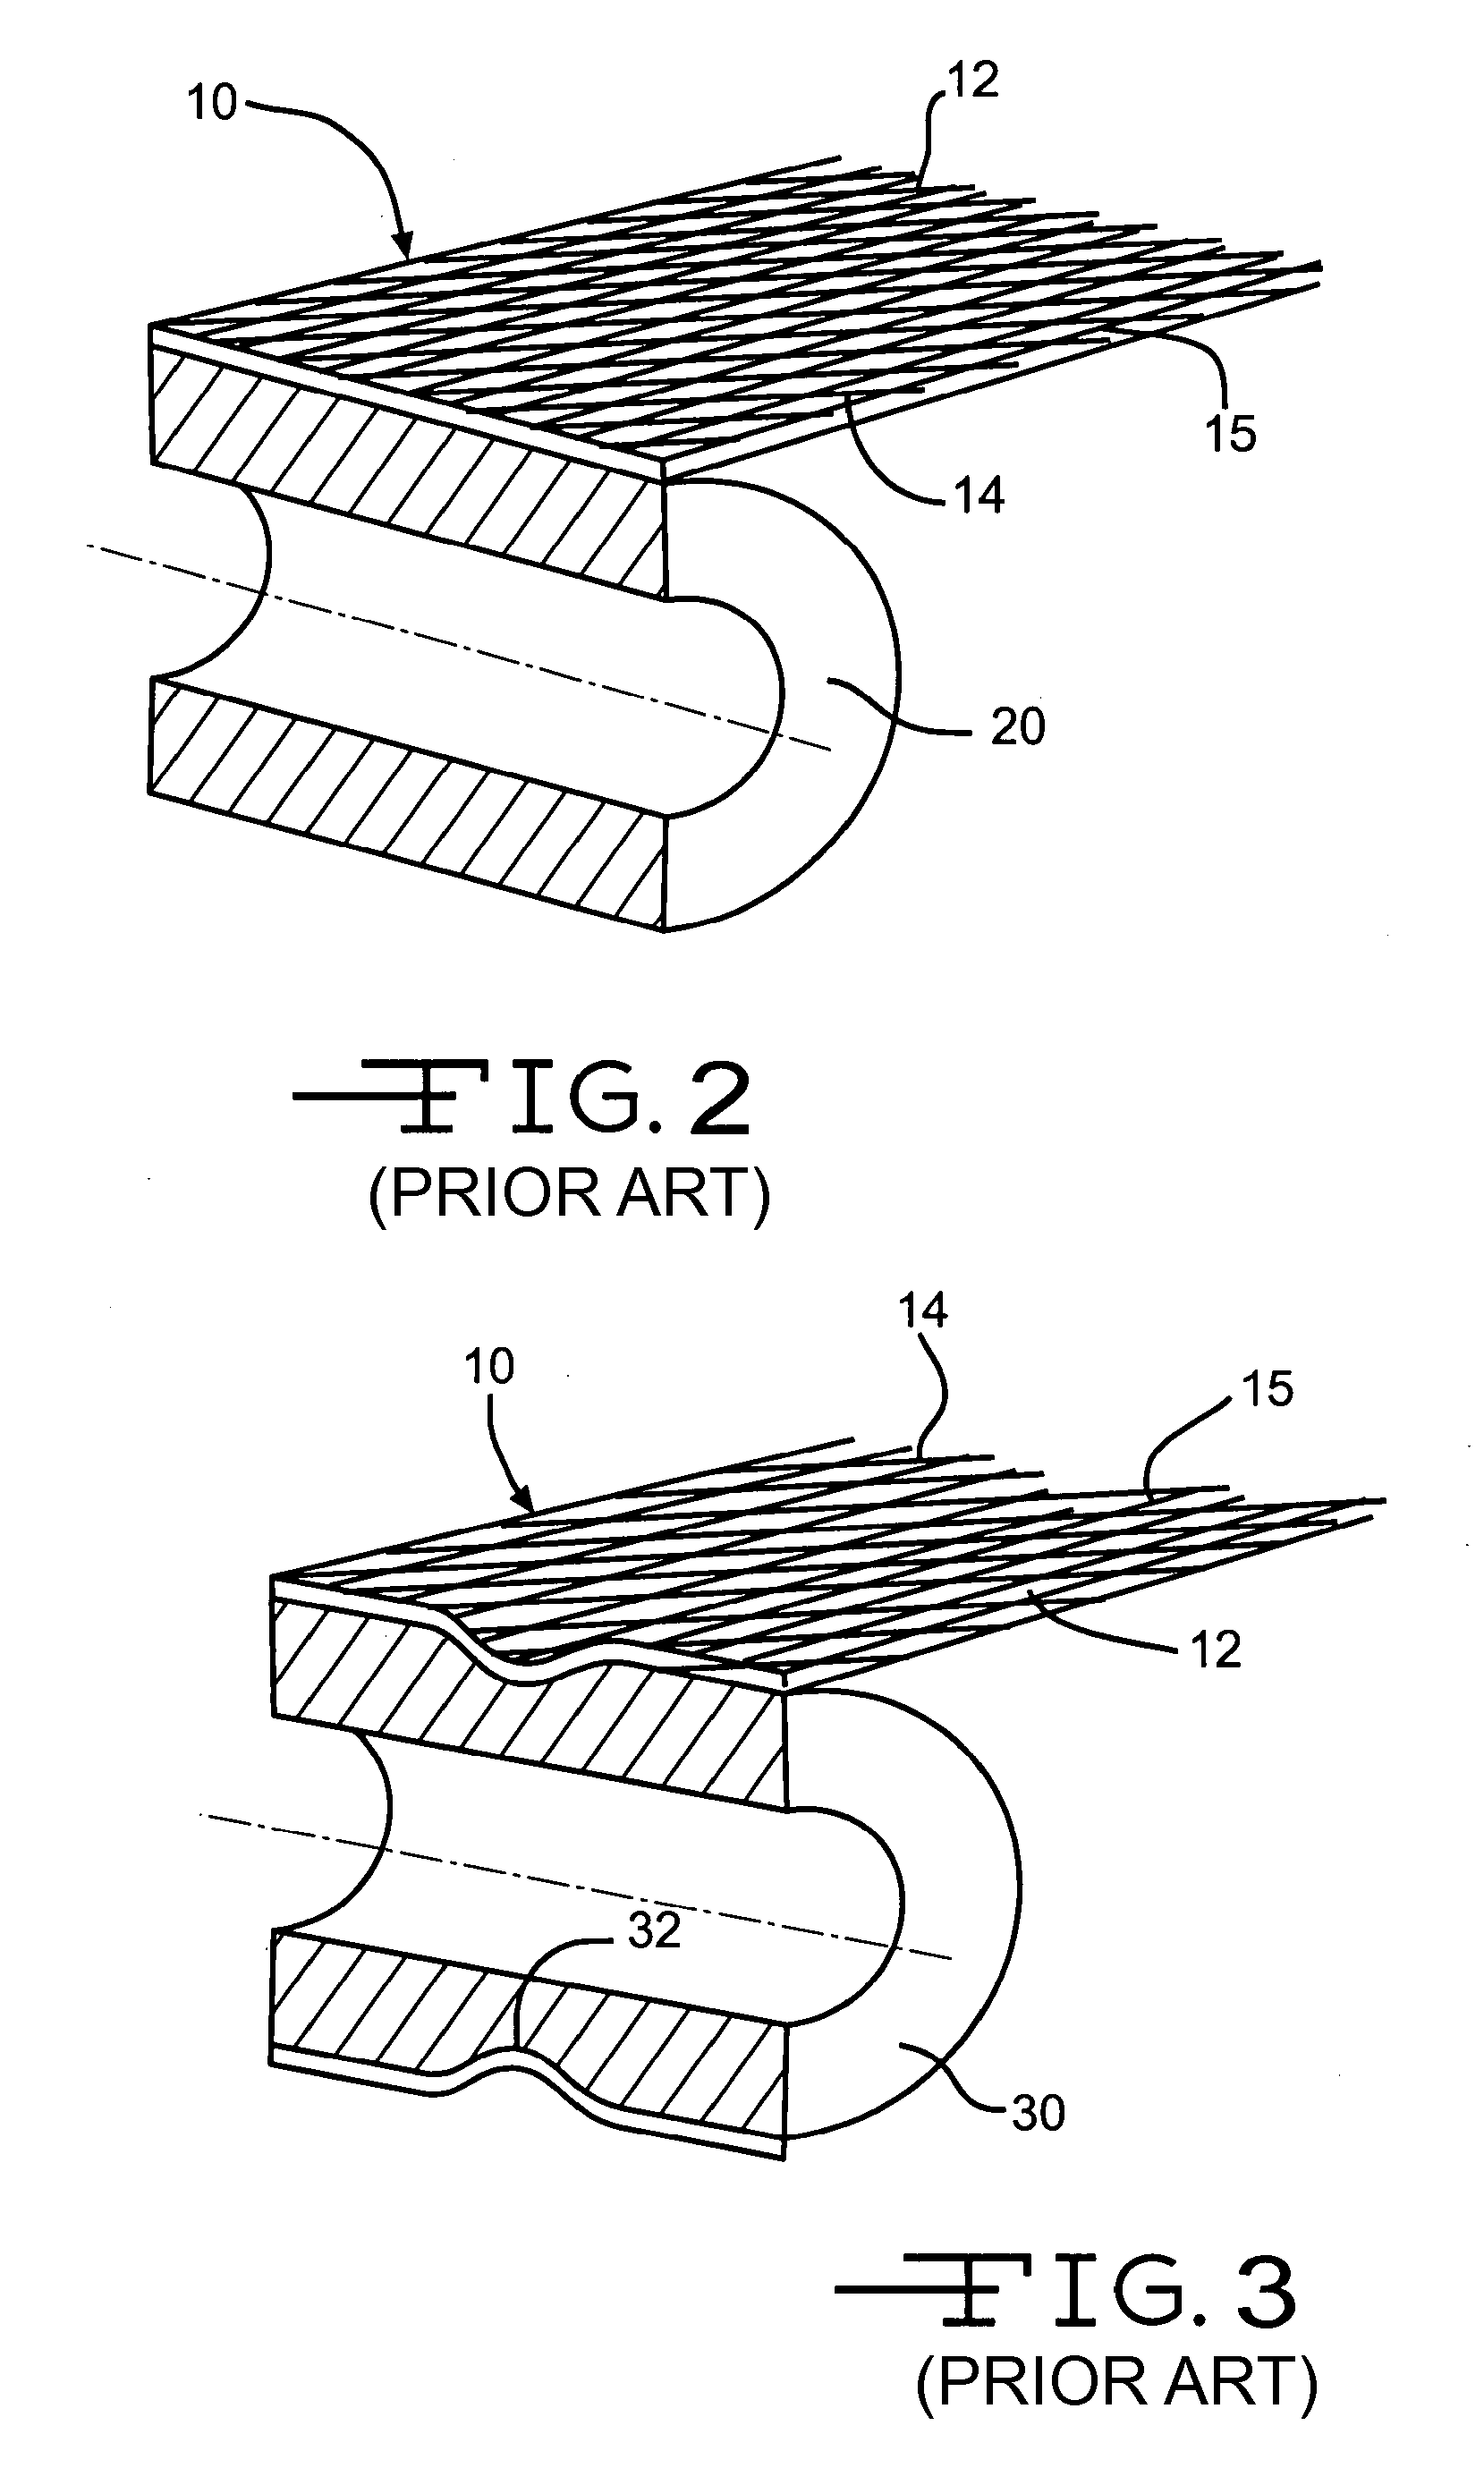 Method and apparatus for shipping braided composite reinforcing fabric